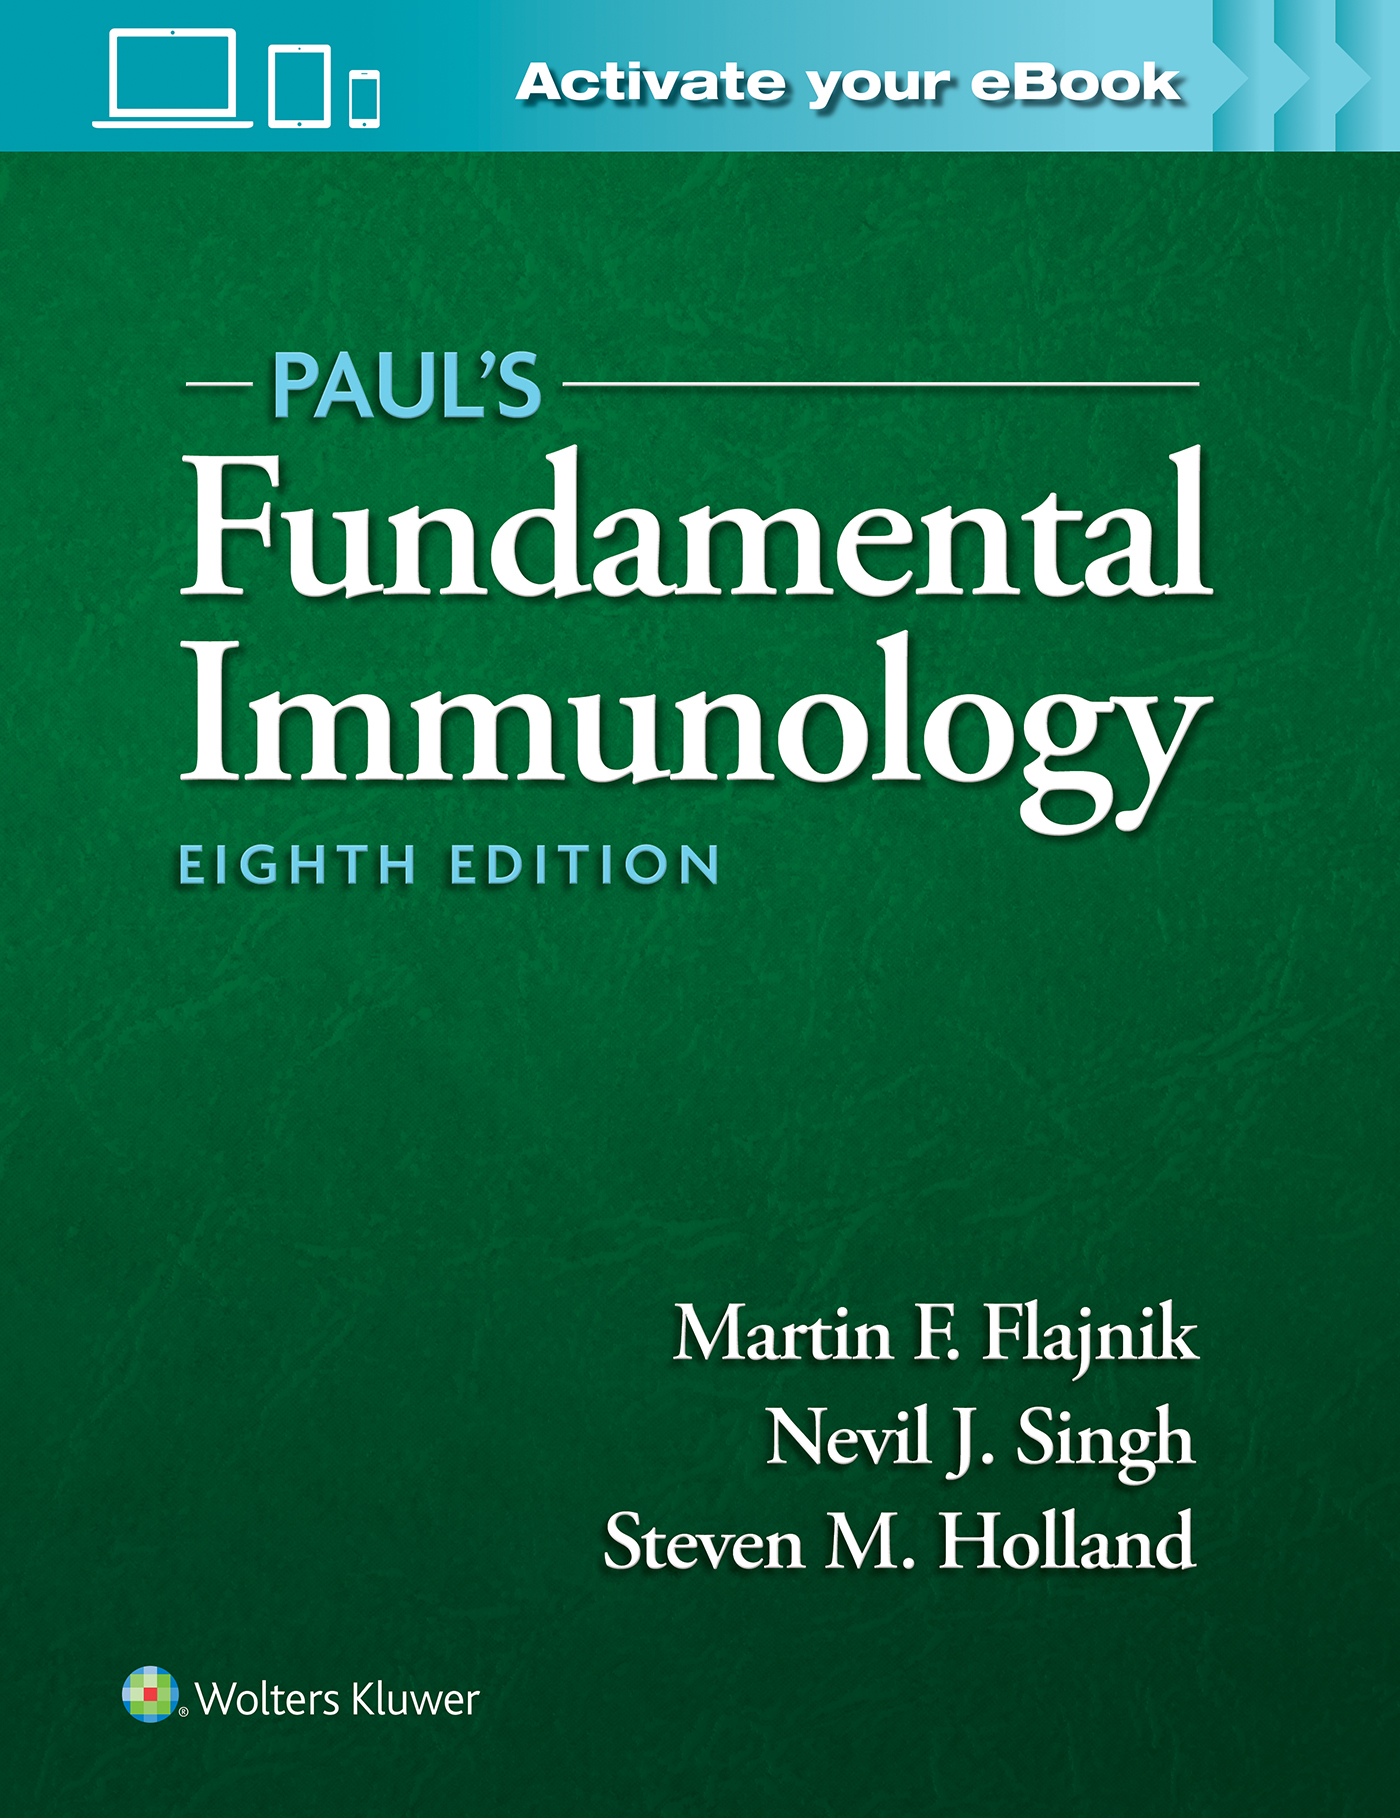 Book cover image for Paul's Fundamental Immunology cover, the cover is hunter green with white serif lettering